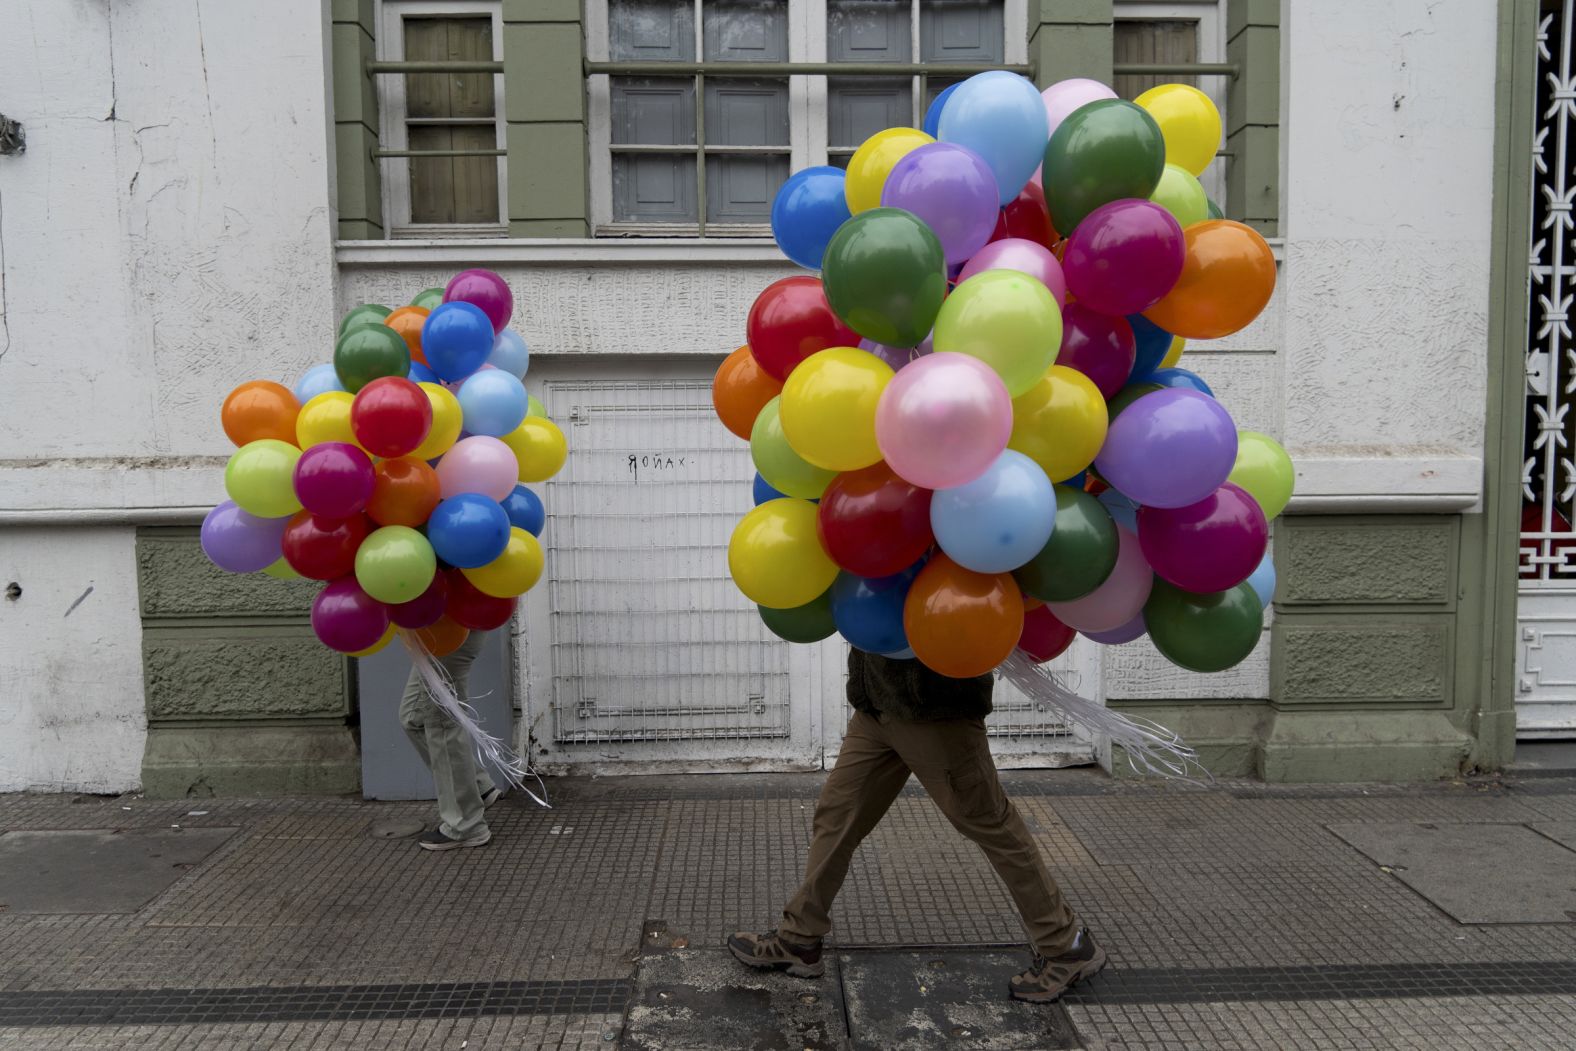 Protesters carry balloons to an International Workers' Day march in Santiago, Chile, on Wednesday, May 1.